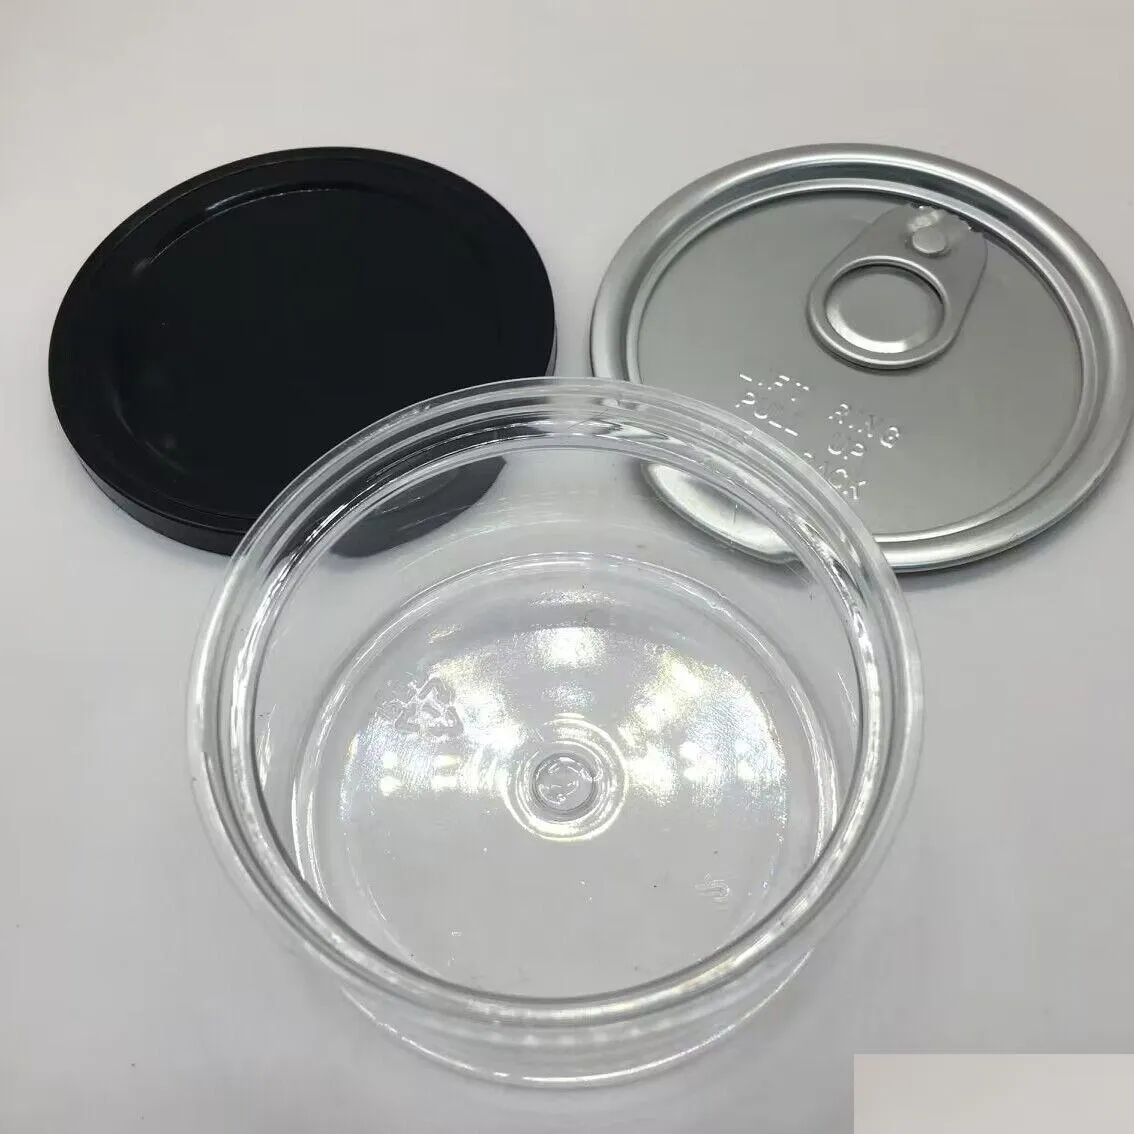 Plastic Can PET Blank Sleek Slim Aluminum Packing OEM 30G 50G 100G Transparent Jar Food Herb Container Bottle Customizing Available